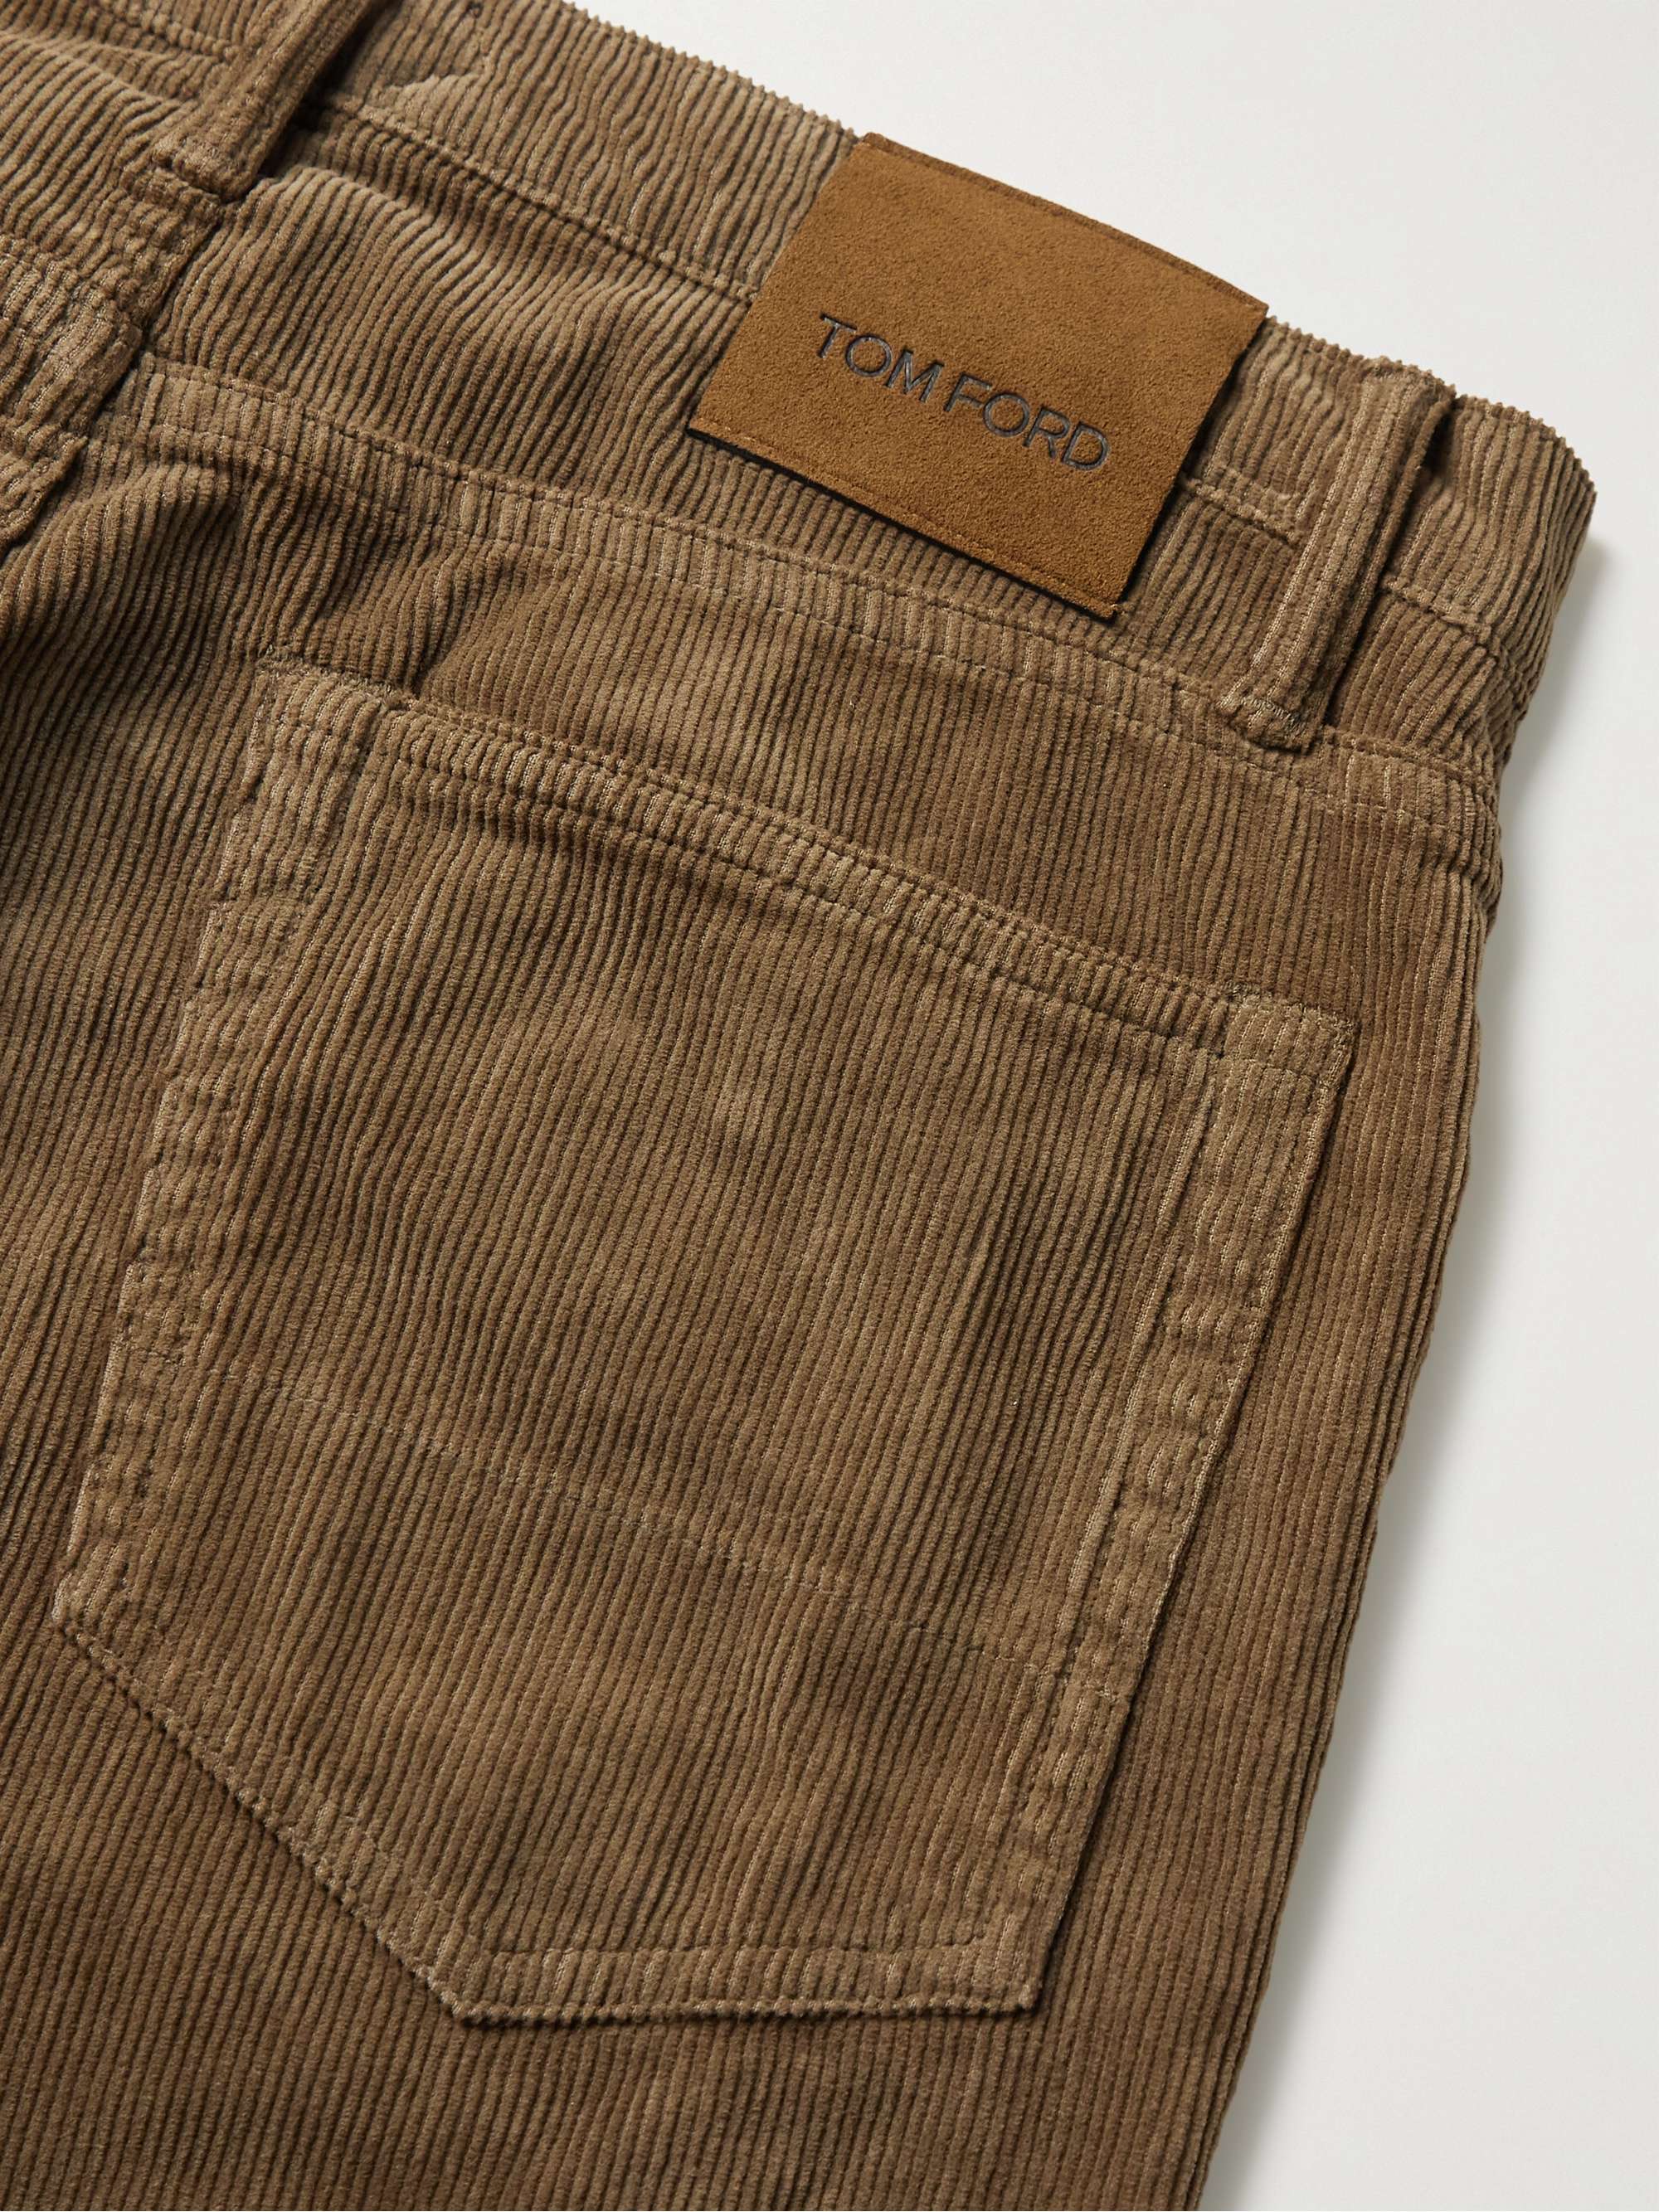 TOM FORD Slim-Fit Cotton-Blend Corduroy Trousers